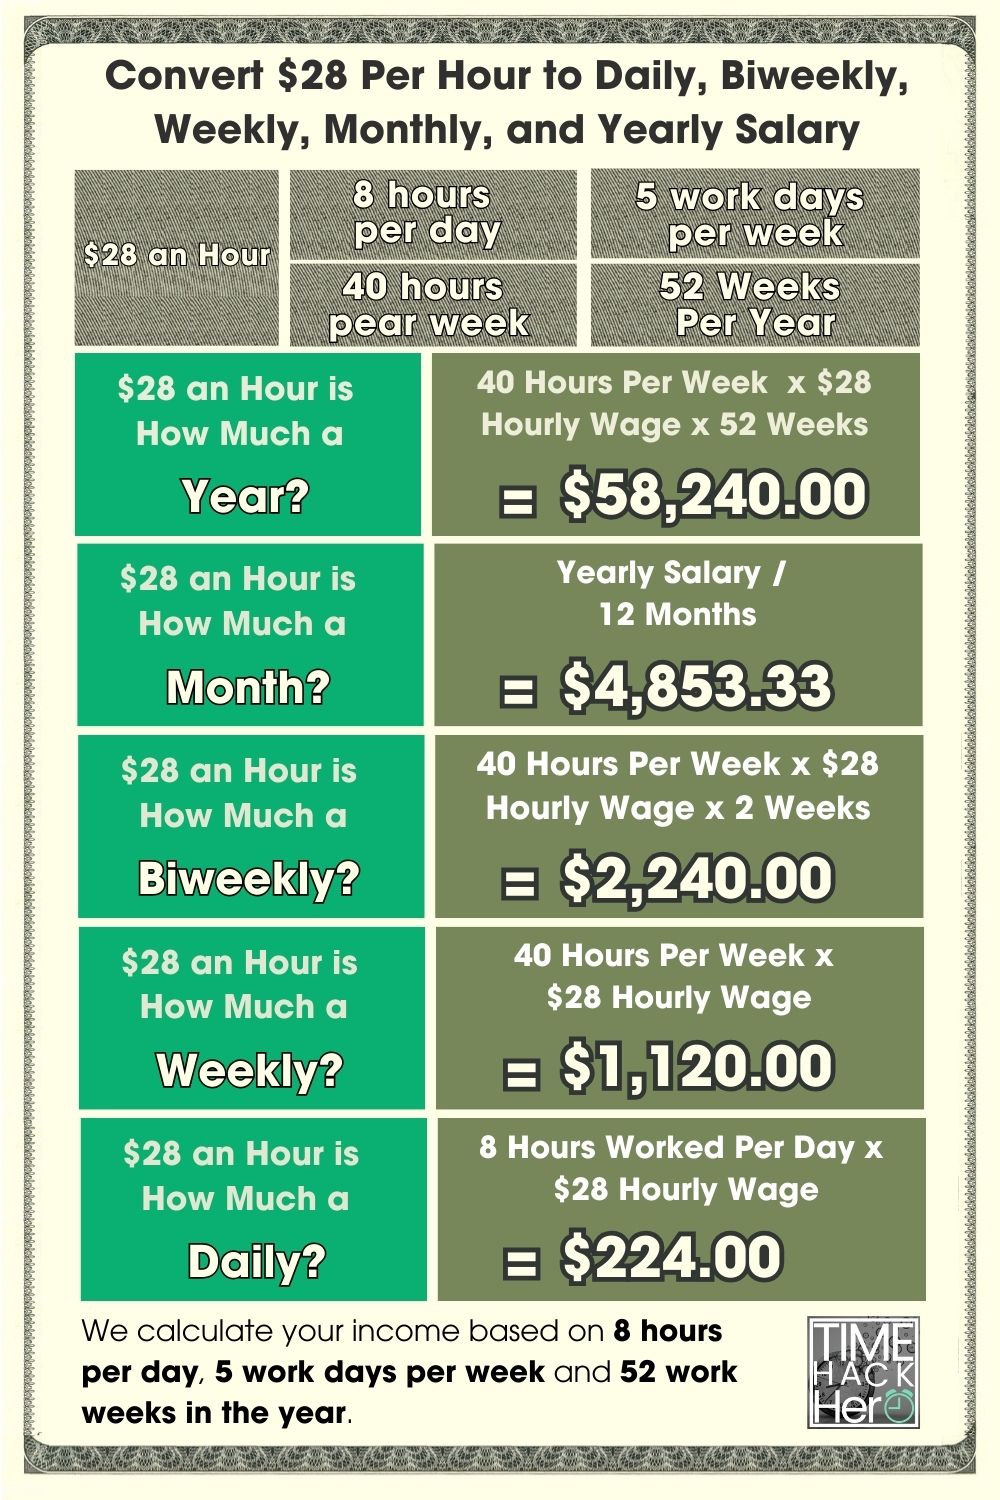 Convert $28 Per Hour to Daily, Biweekly, Weekly, Monthly, and Yearly Salary